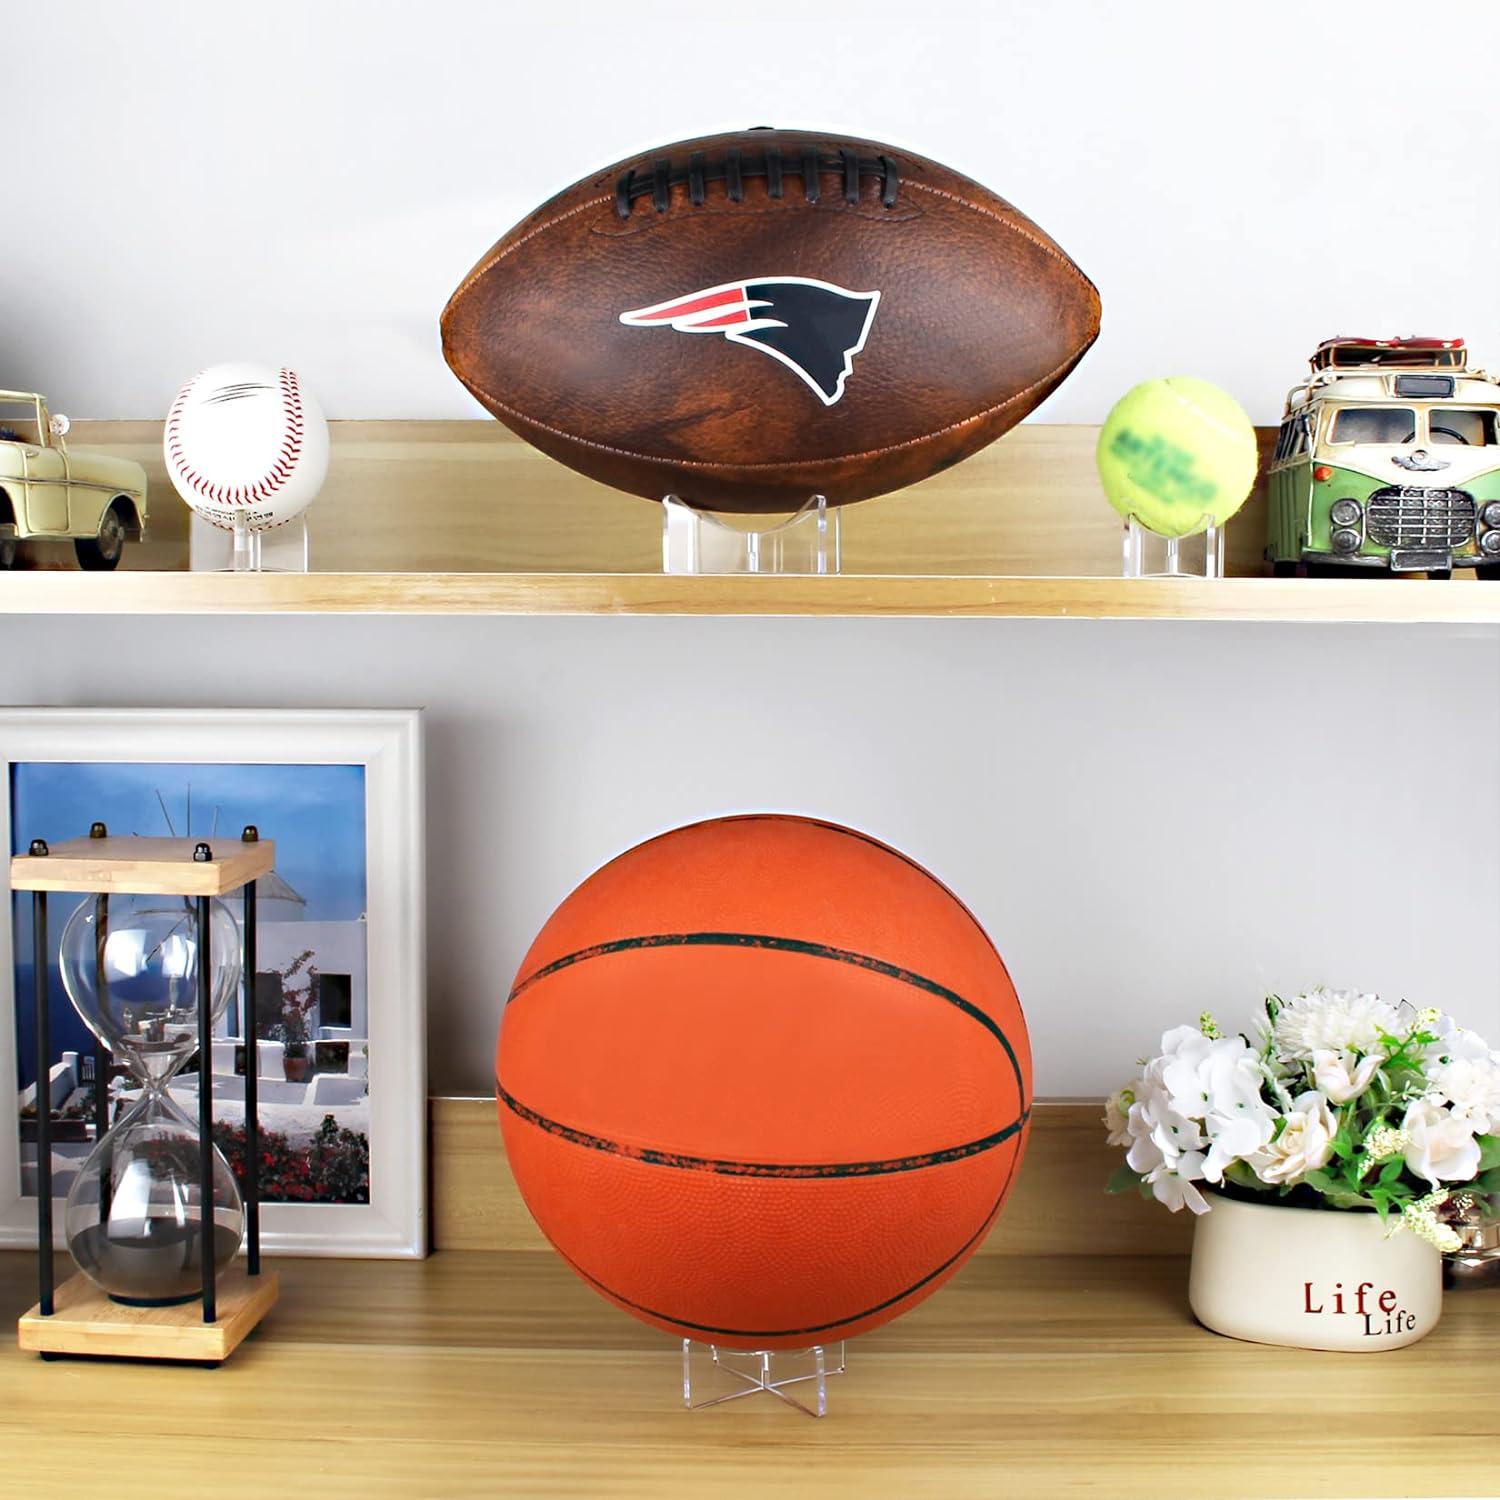 Ball Stand Basketball Football Soccer Rugby Plastic Display Holder  trainging Stands Rugby decoration fit Home office desk - AliExpress